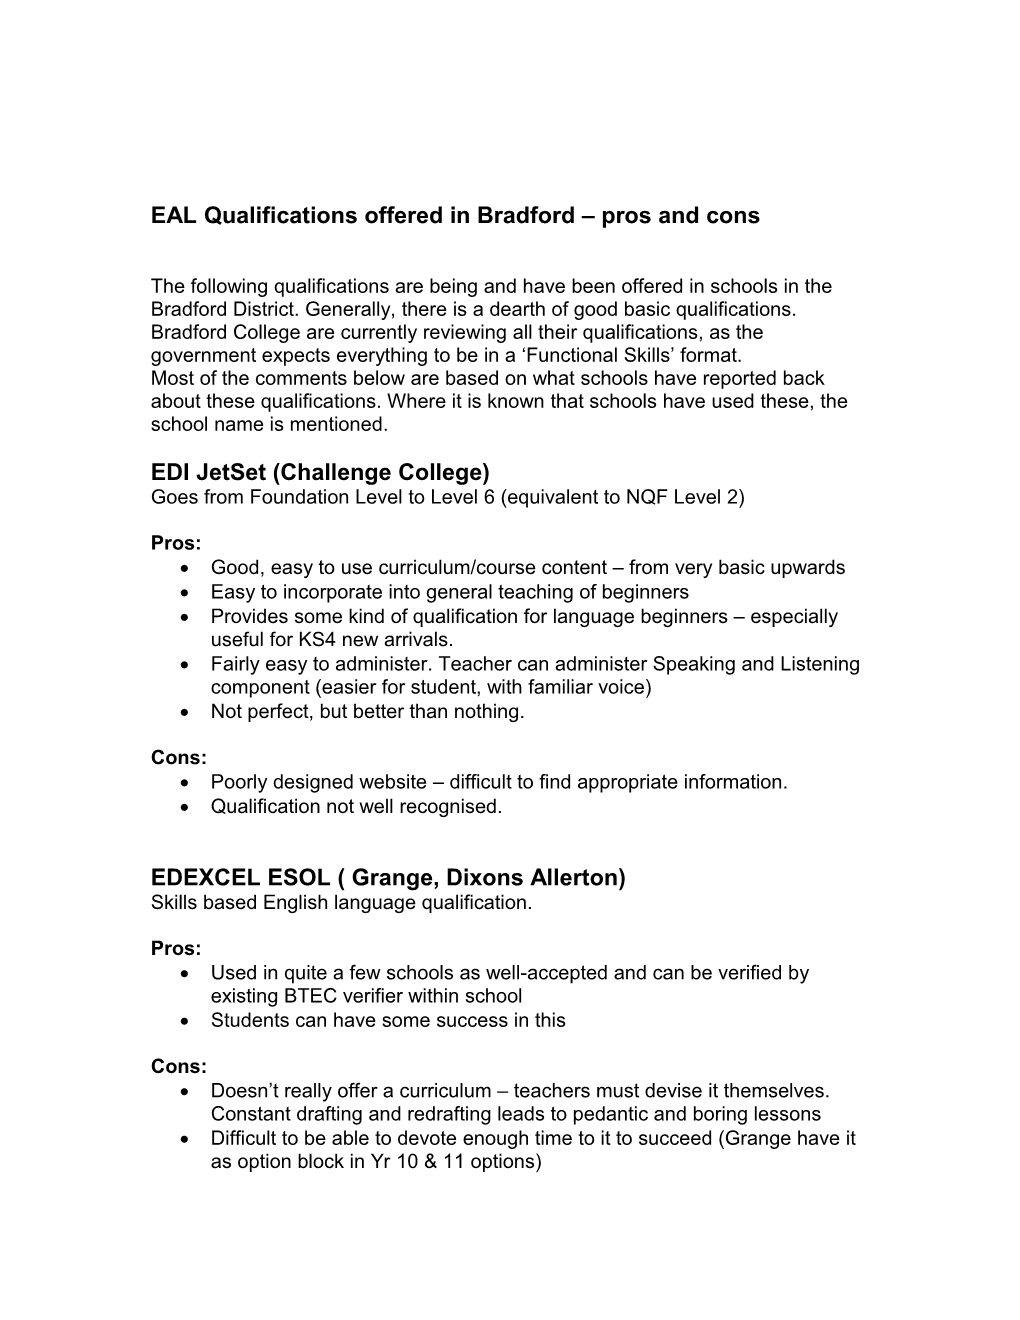 EAL Qualifications Offered in Bradford Pros and Cons